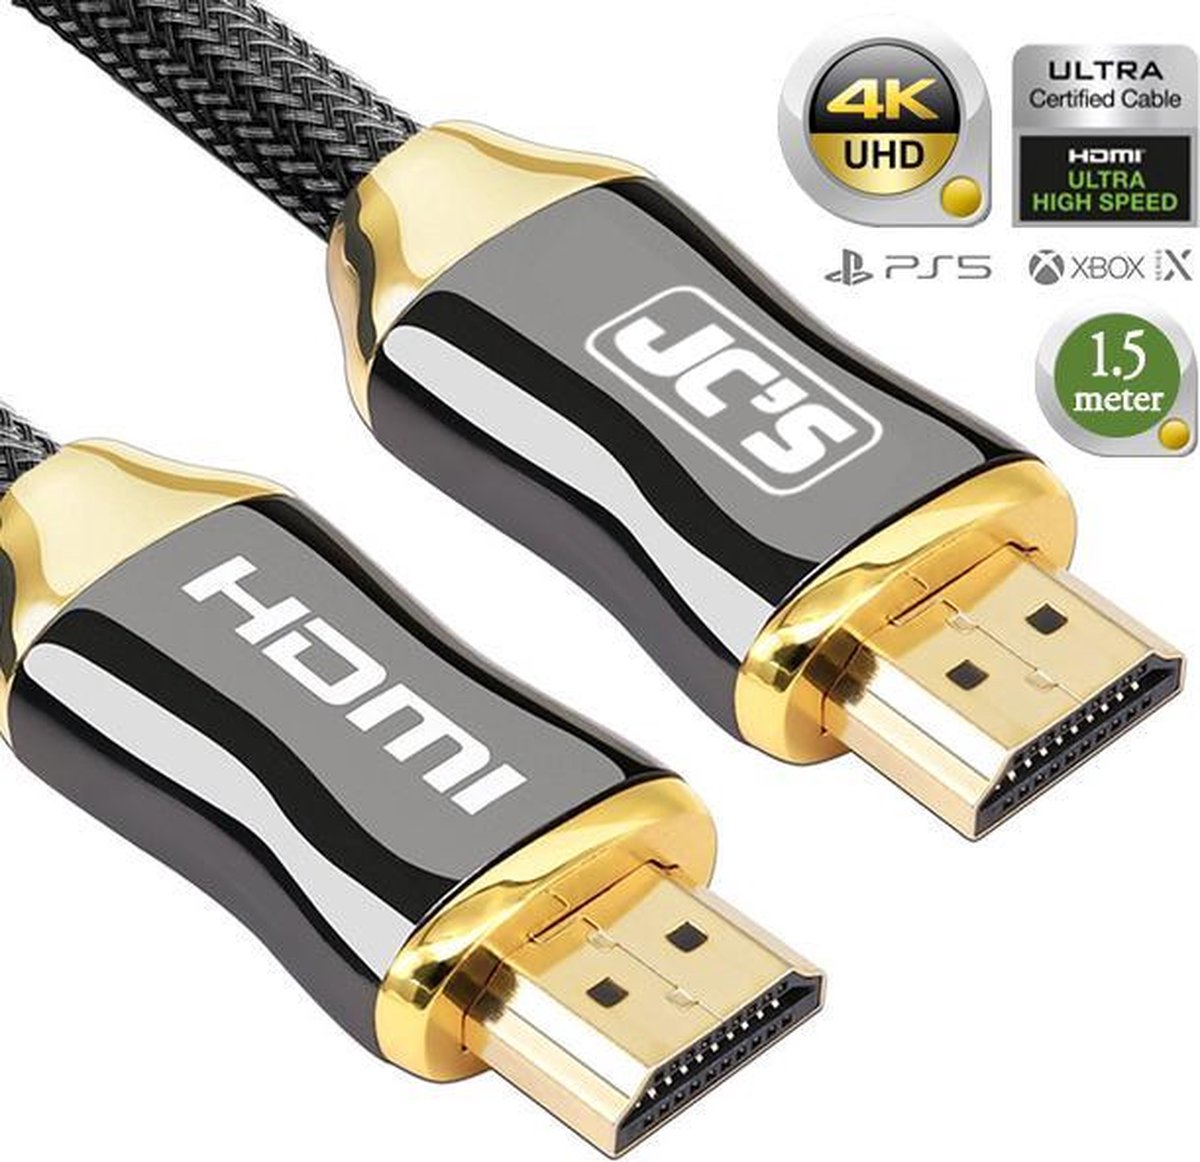 ✅ JC'S - HDMI Kabel 2.0 Gold Plated - High Speed Cable - 18GBPS - Full HD 1080p - 3D - 4K (60 Hz)- Ethernet - Audio Return Channel - HDMI naar HDMI - Male to Male - Voor TV - DVD - Laptop - Tablet - PC - Beeldscherm - Beamer - 1.5 Meter - JC's